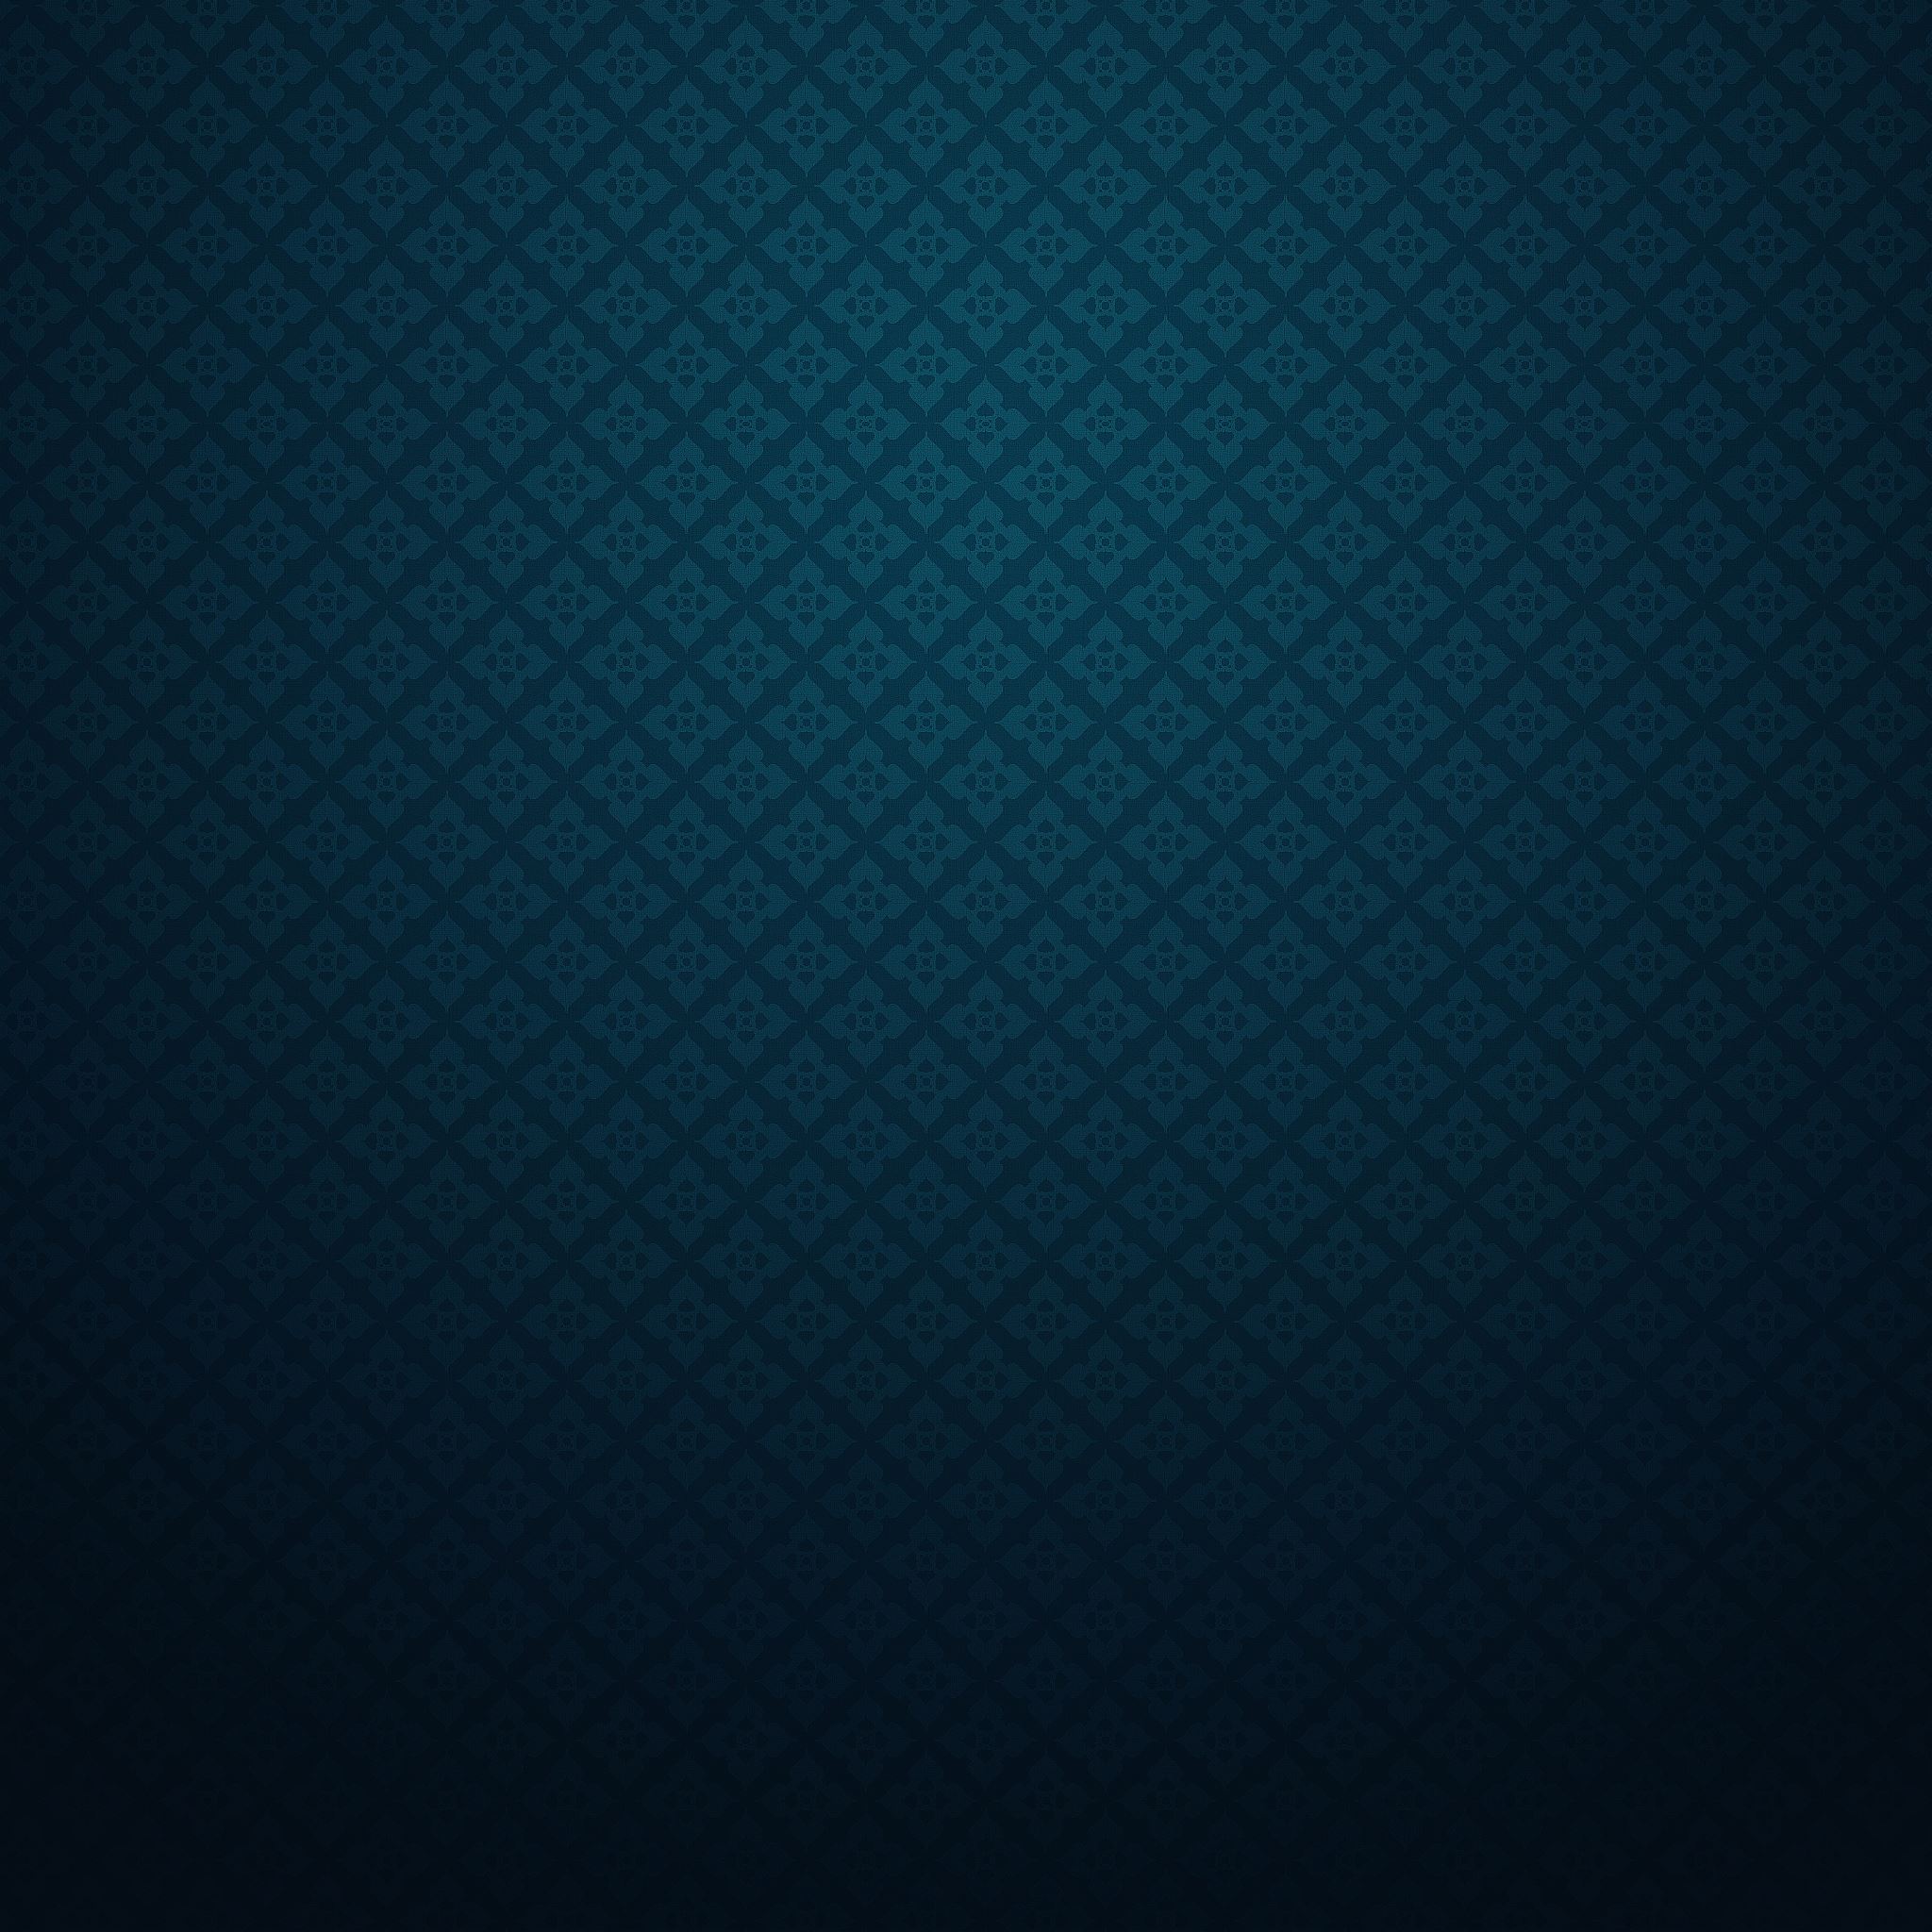 Simple Textured Ipad Air Wallpapers Free Download